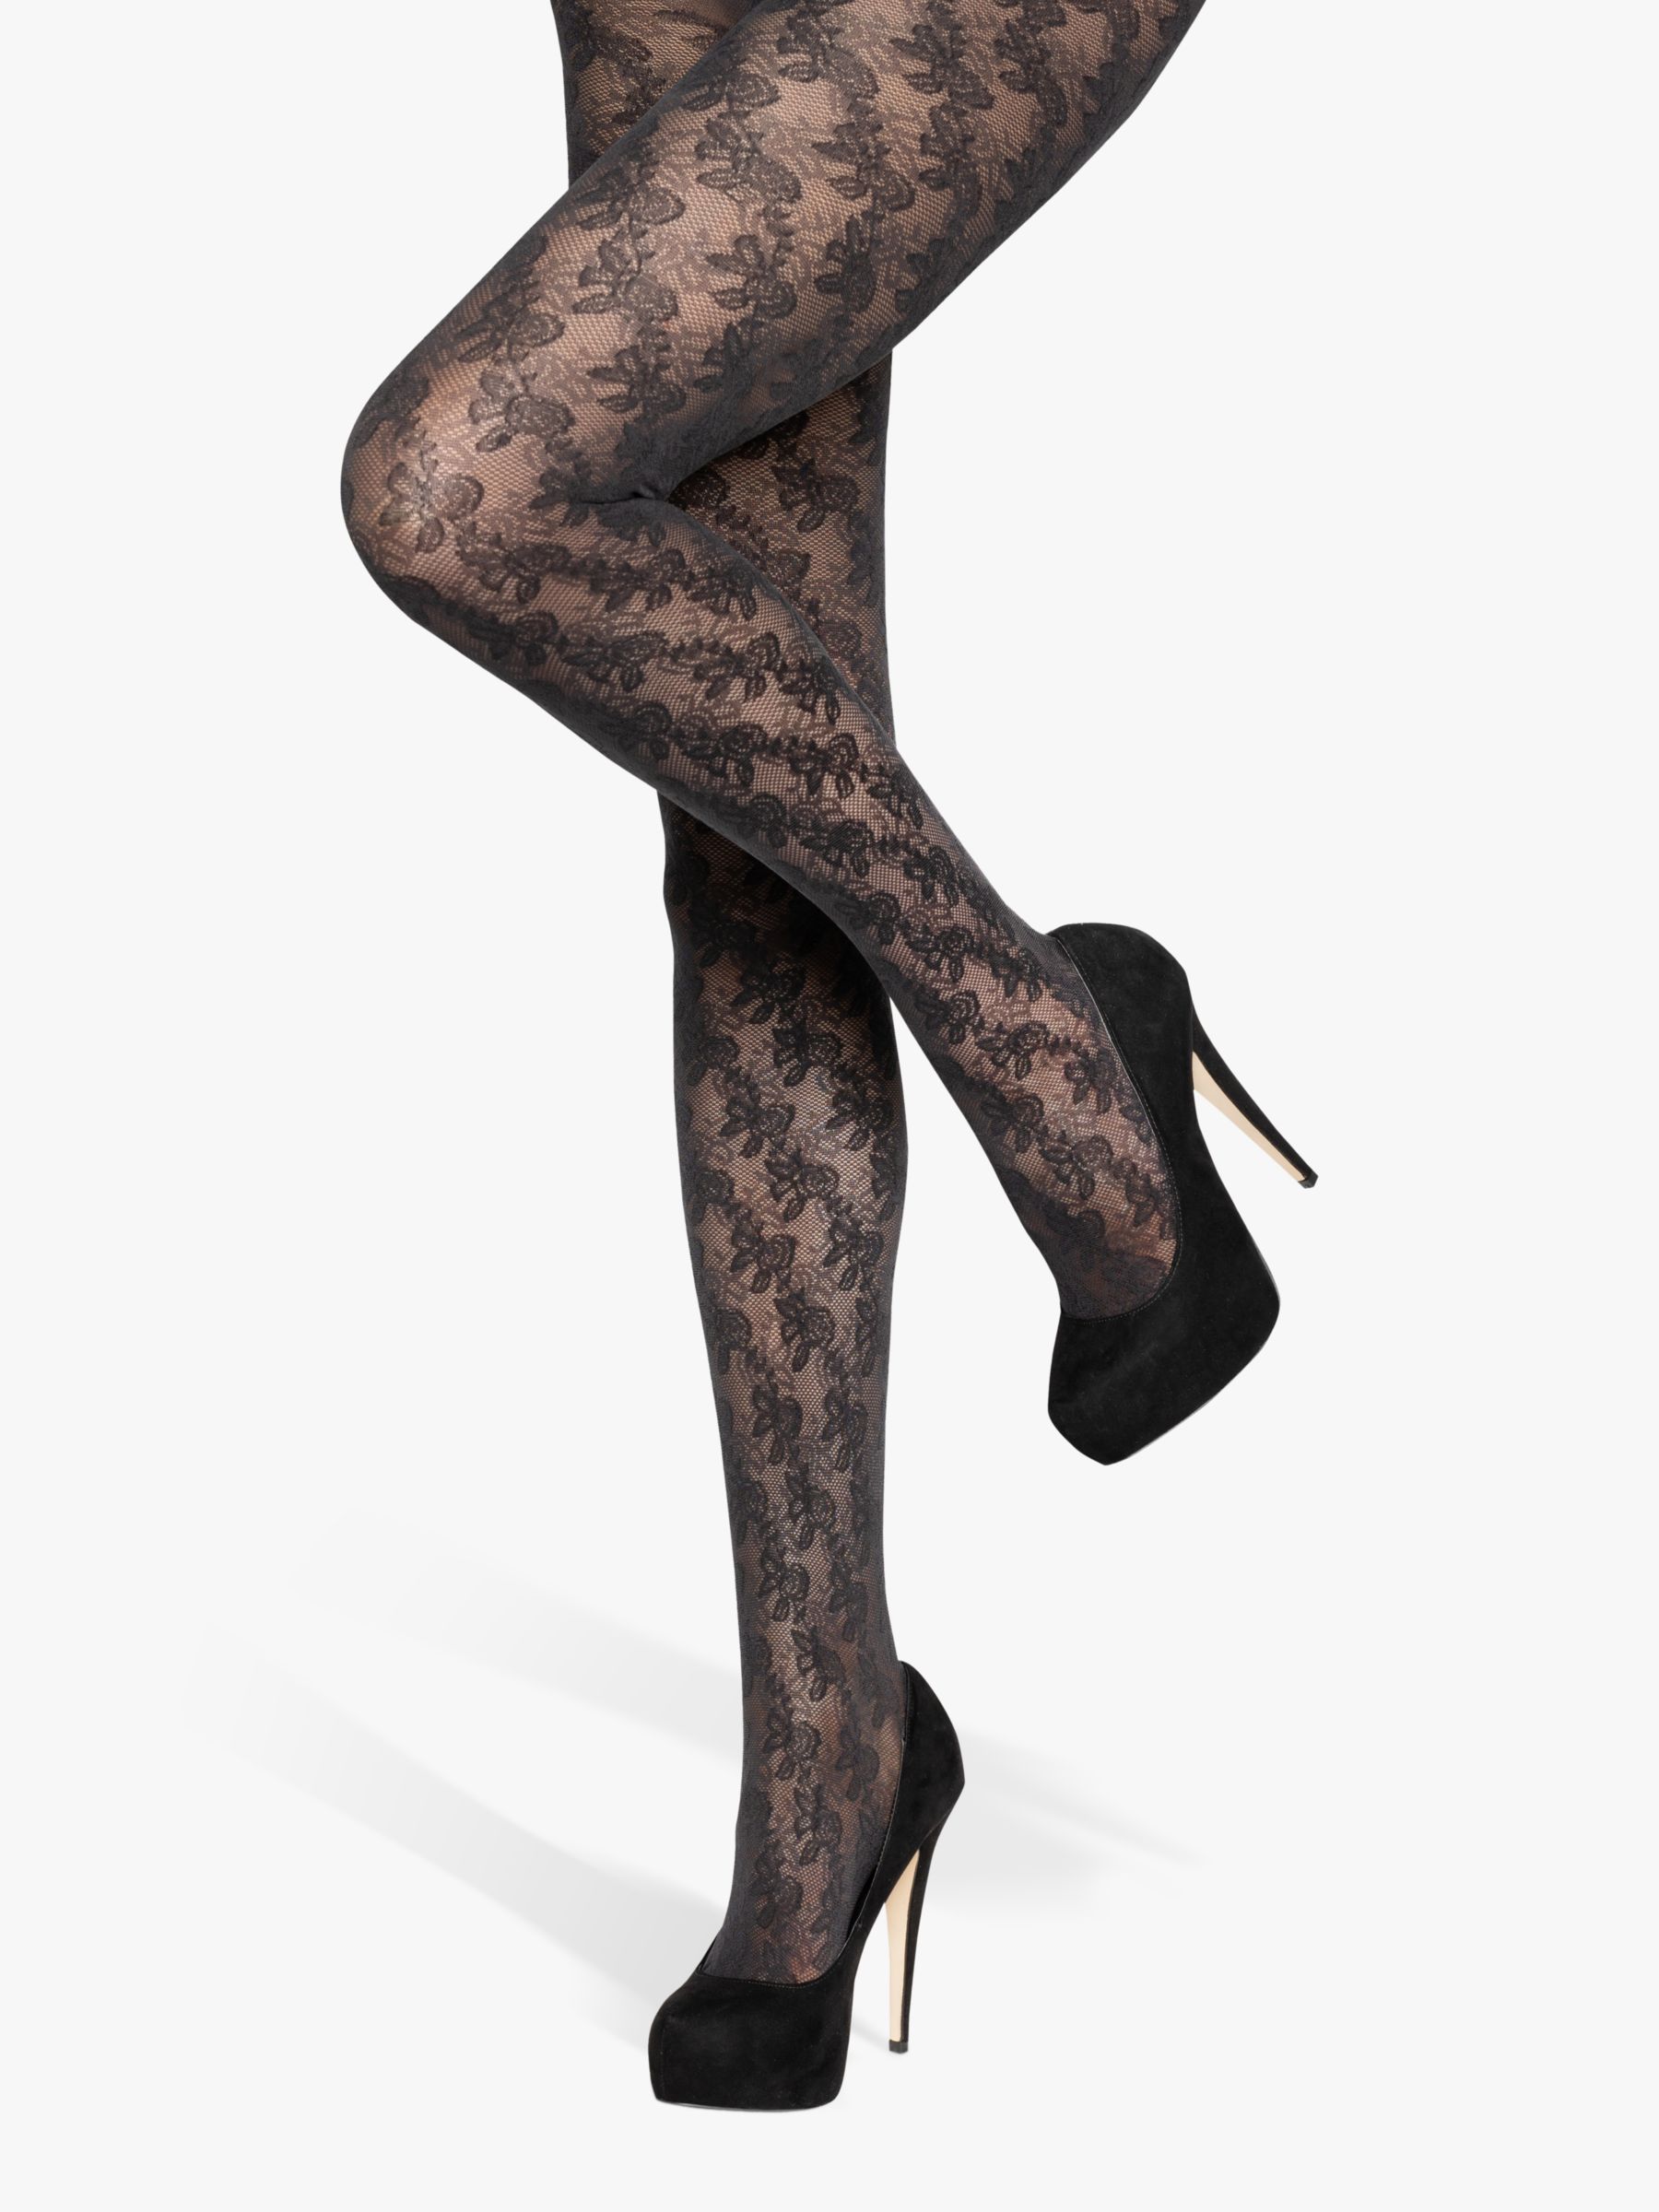 Mango Floral Lace Tights, White at John Lewis & Partners